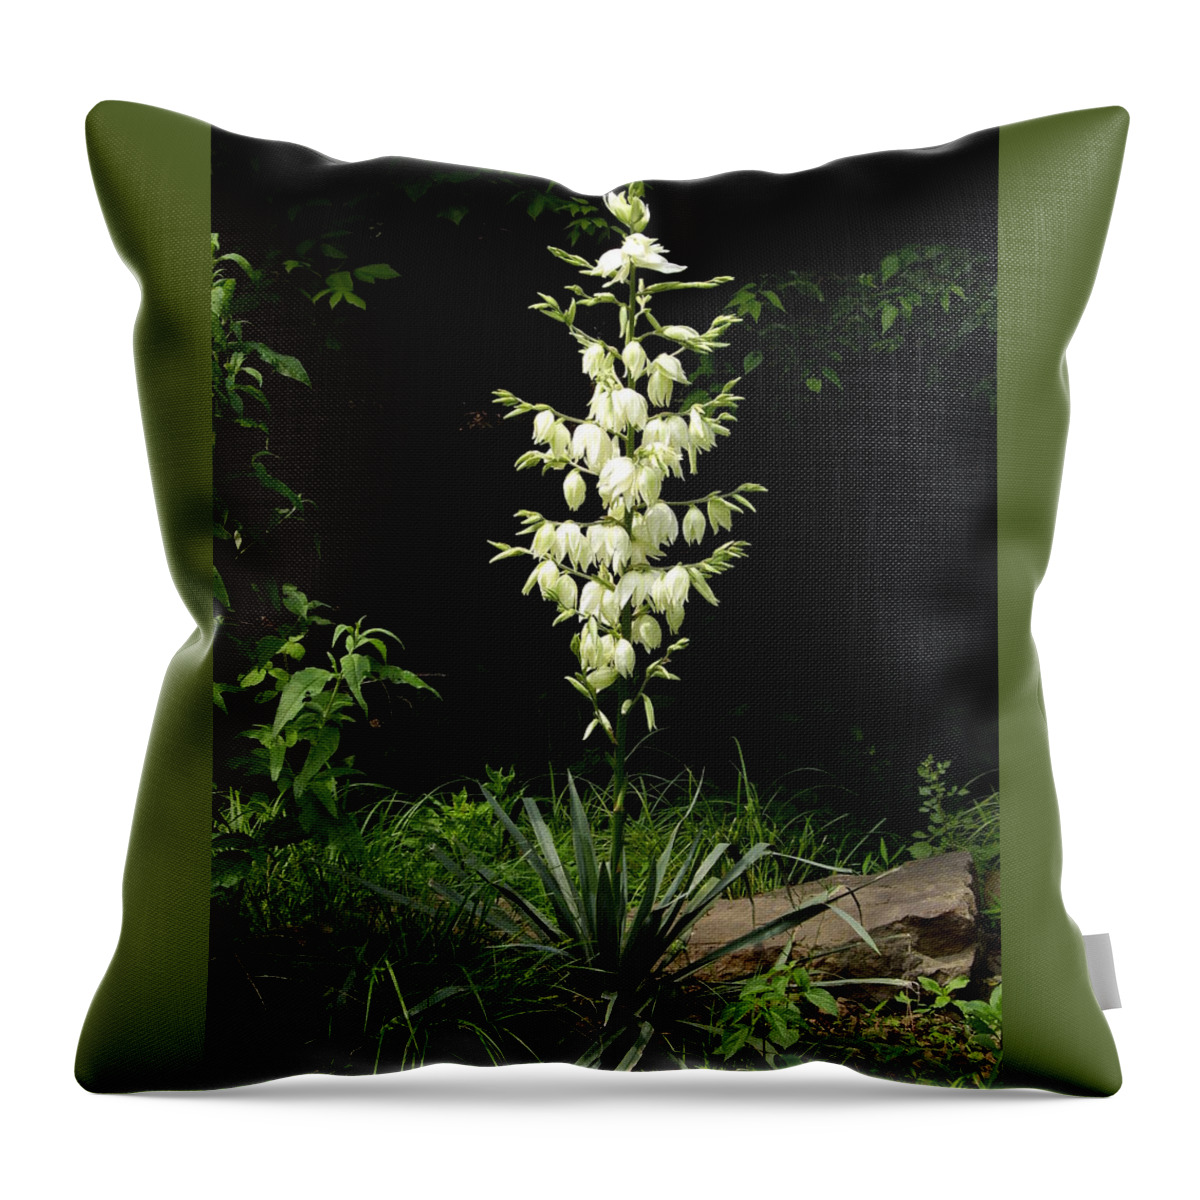 Yucca Throw Pillow featuring the photograph Yucca Blossoms by Nancy Ayanna Wyatt